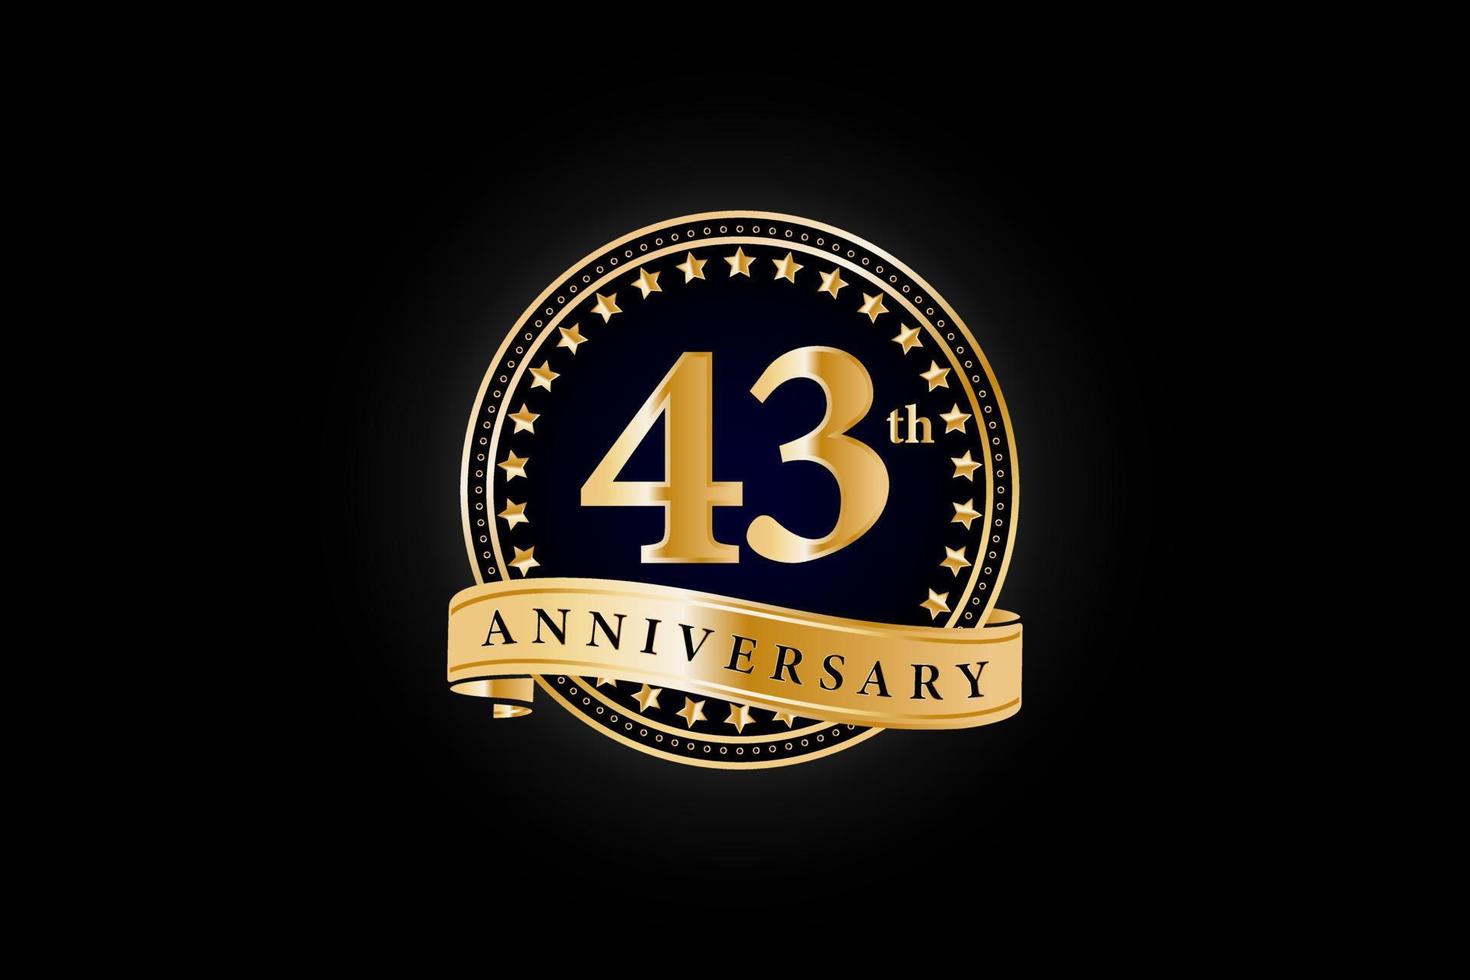 43th Anniversary golden gold logo with ring and gold ribbon isolated on black background, vector design for celebration.